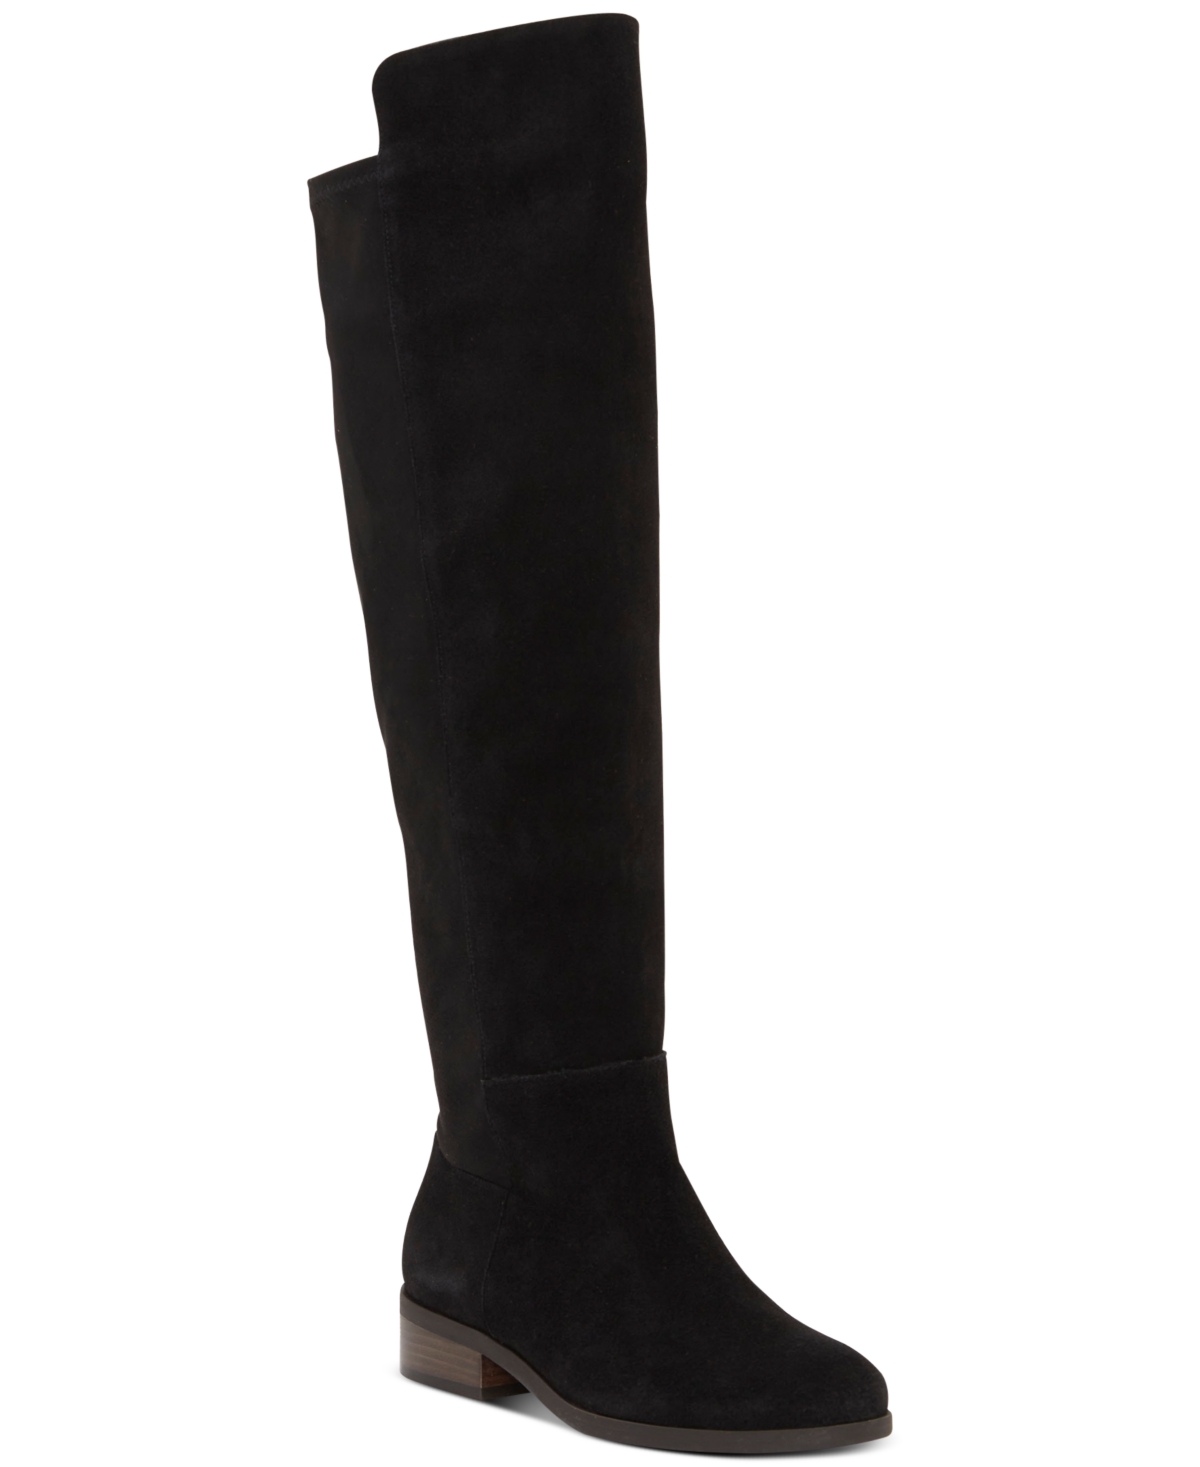 Women's Calypso Over-The-Knee Boots - Ginger